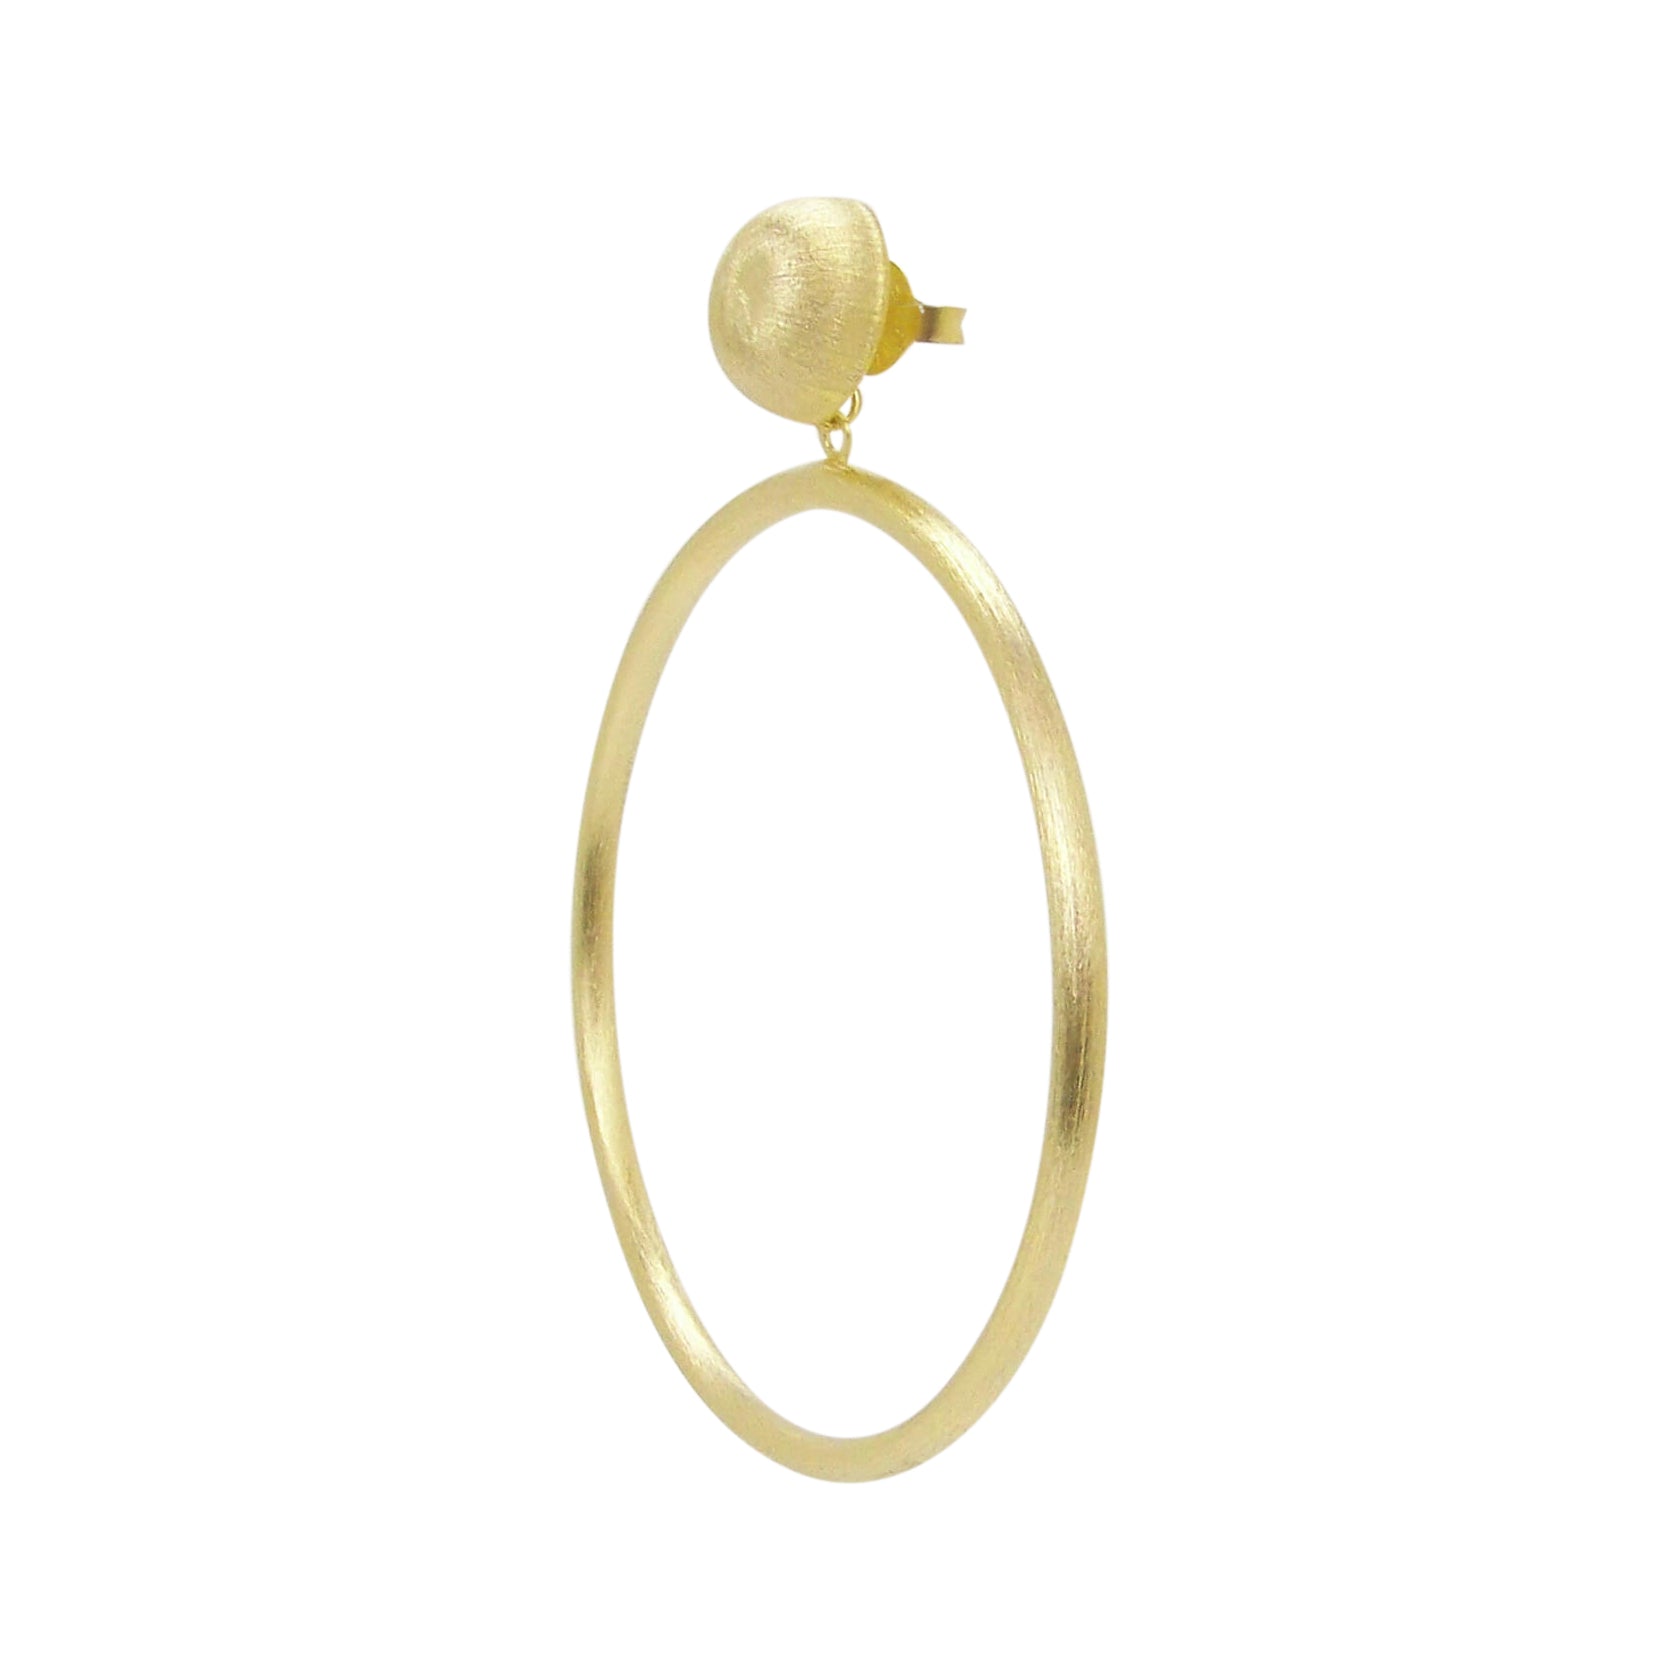 45 degree angle image of Sheila Fajl Visage Front Facing Hoop Earrings in Gold Plated